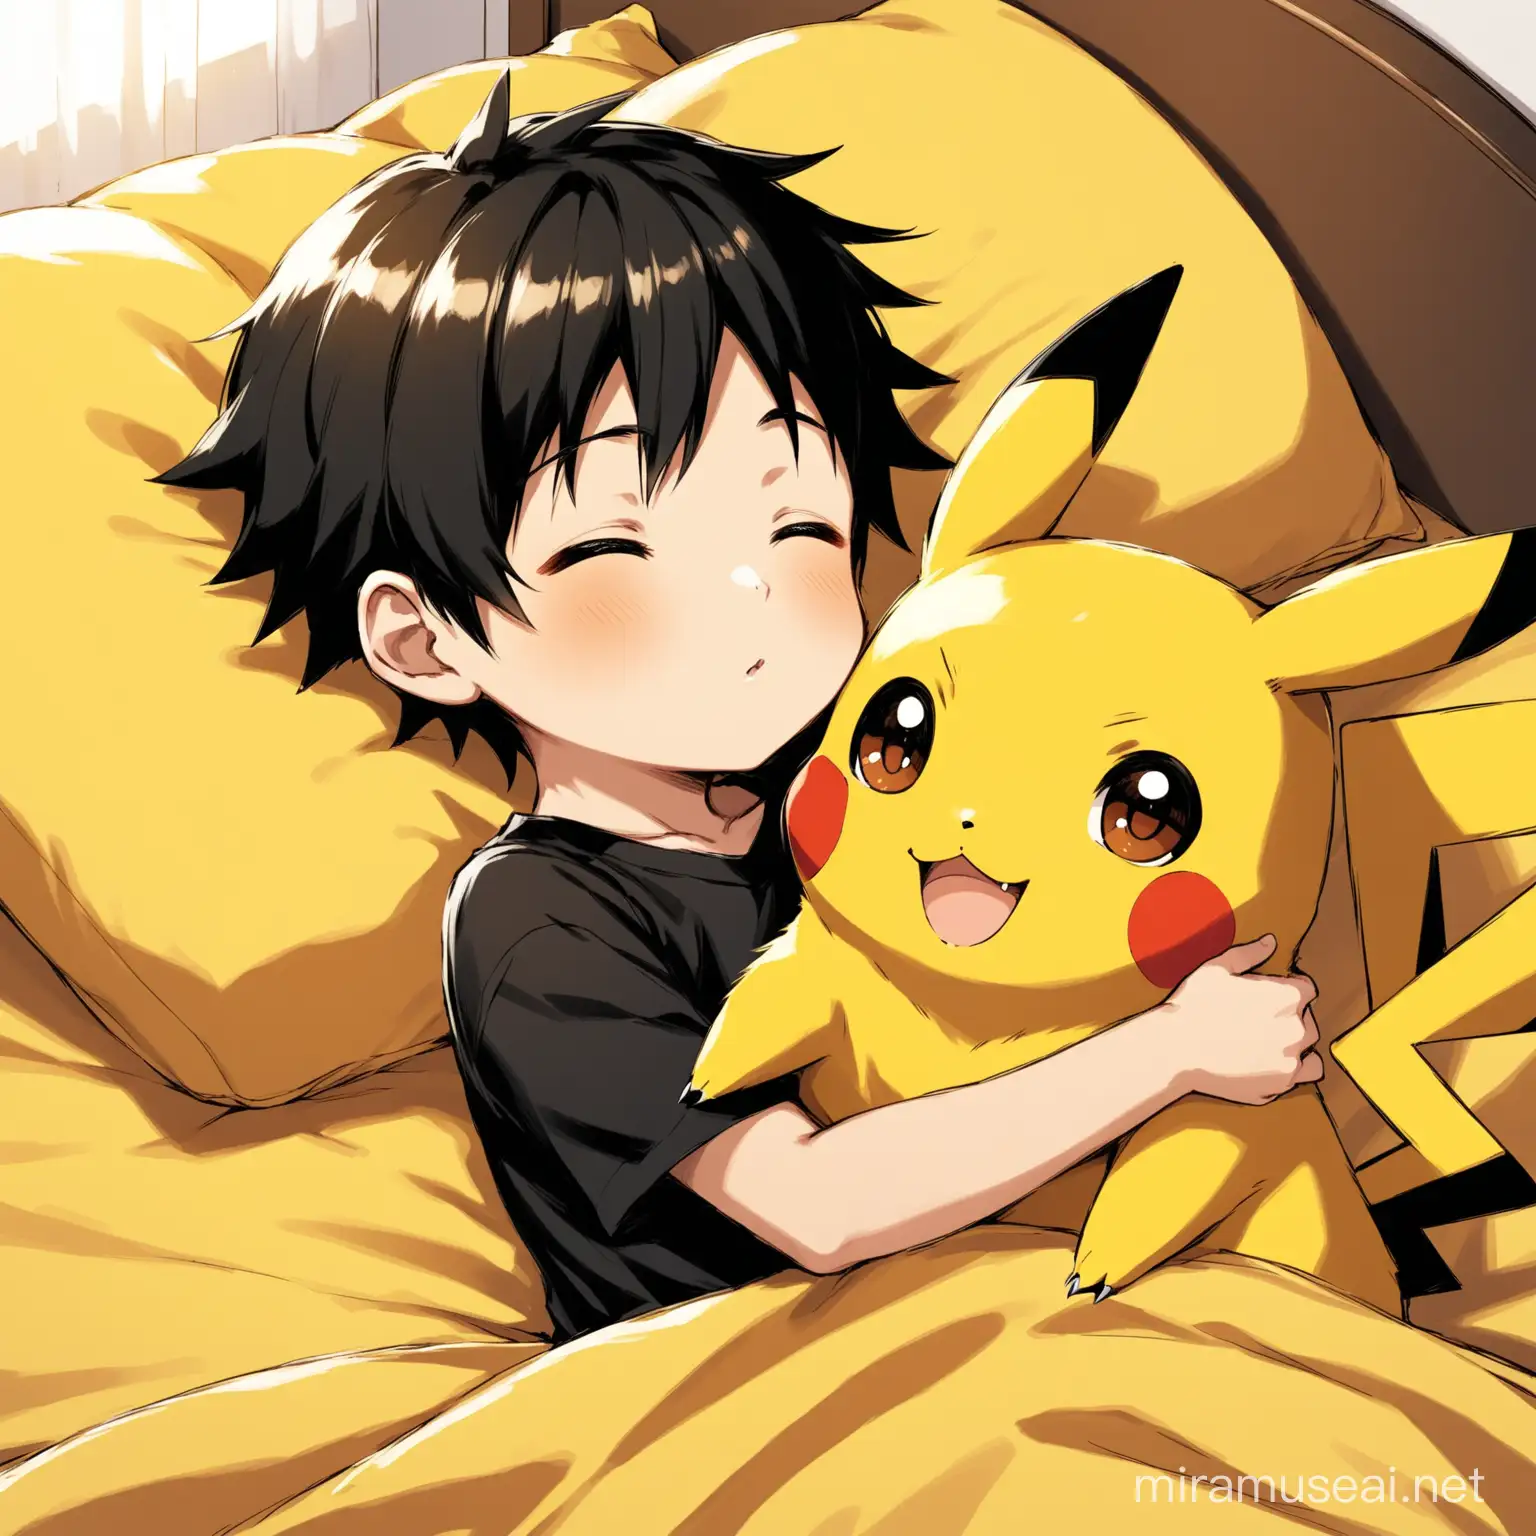  pikachu fell asleep in bed a 9 year old boy with black hair, brown eyes and a black dress loves pikachu